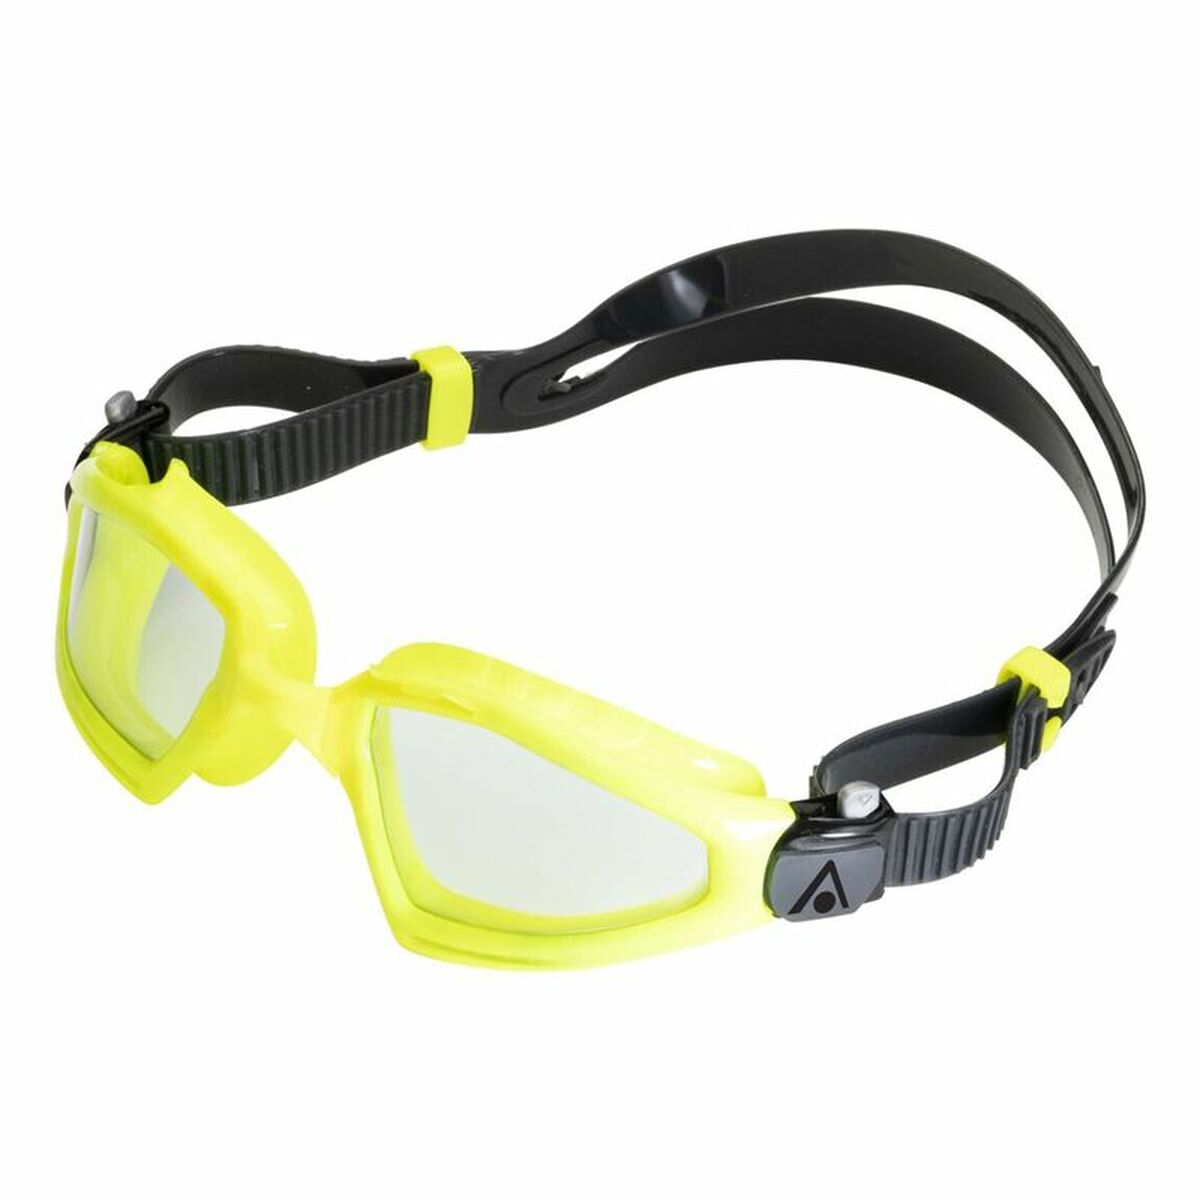 Adult Swimming Goggles Aqua Sphere Kayenne Pro Clear Yellow Black One size